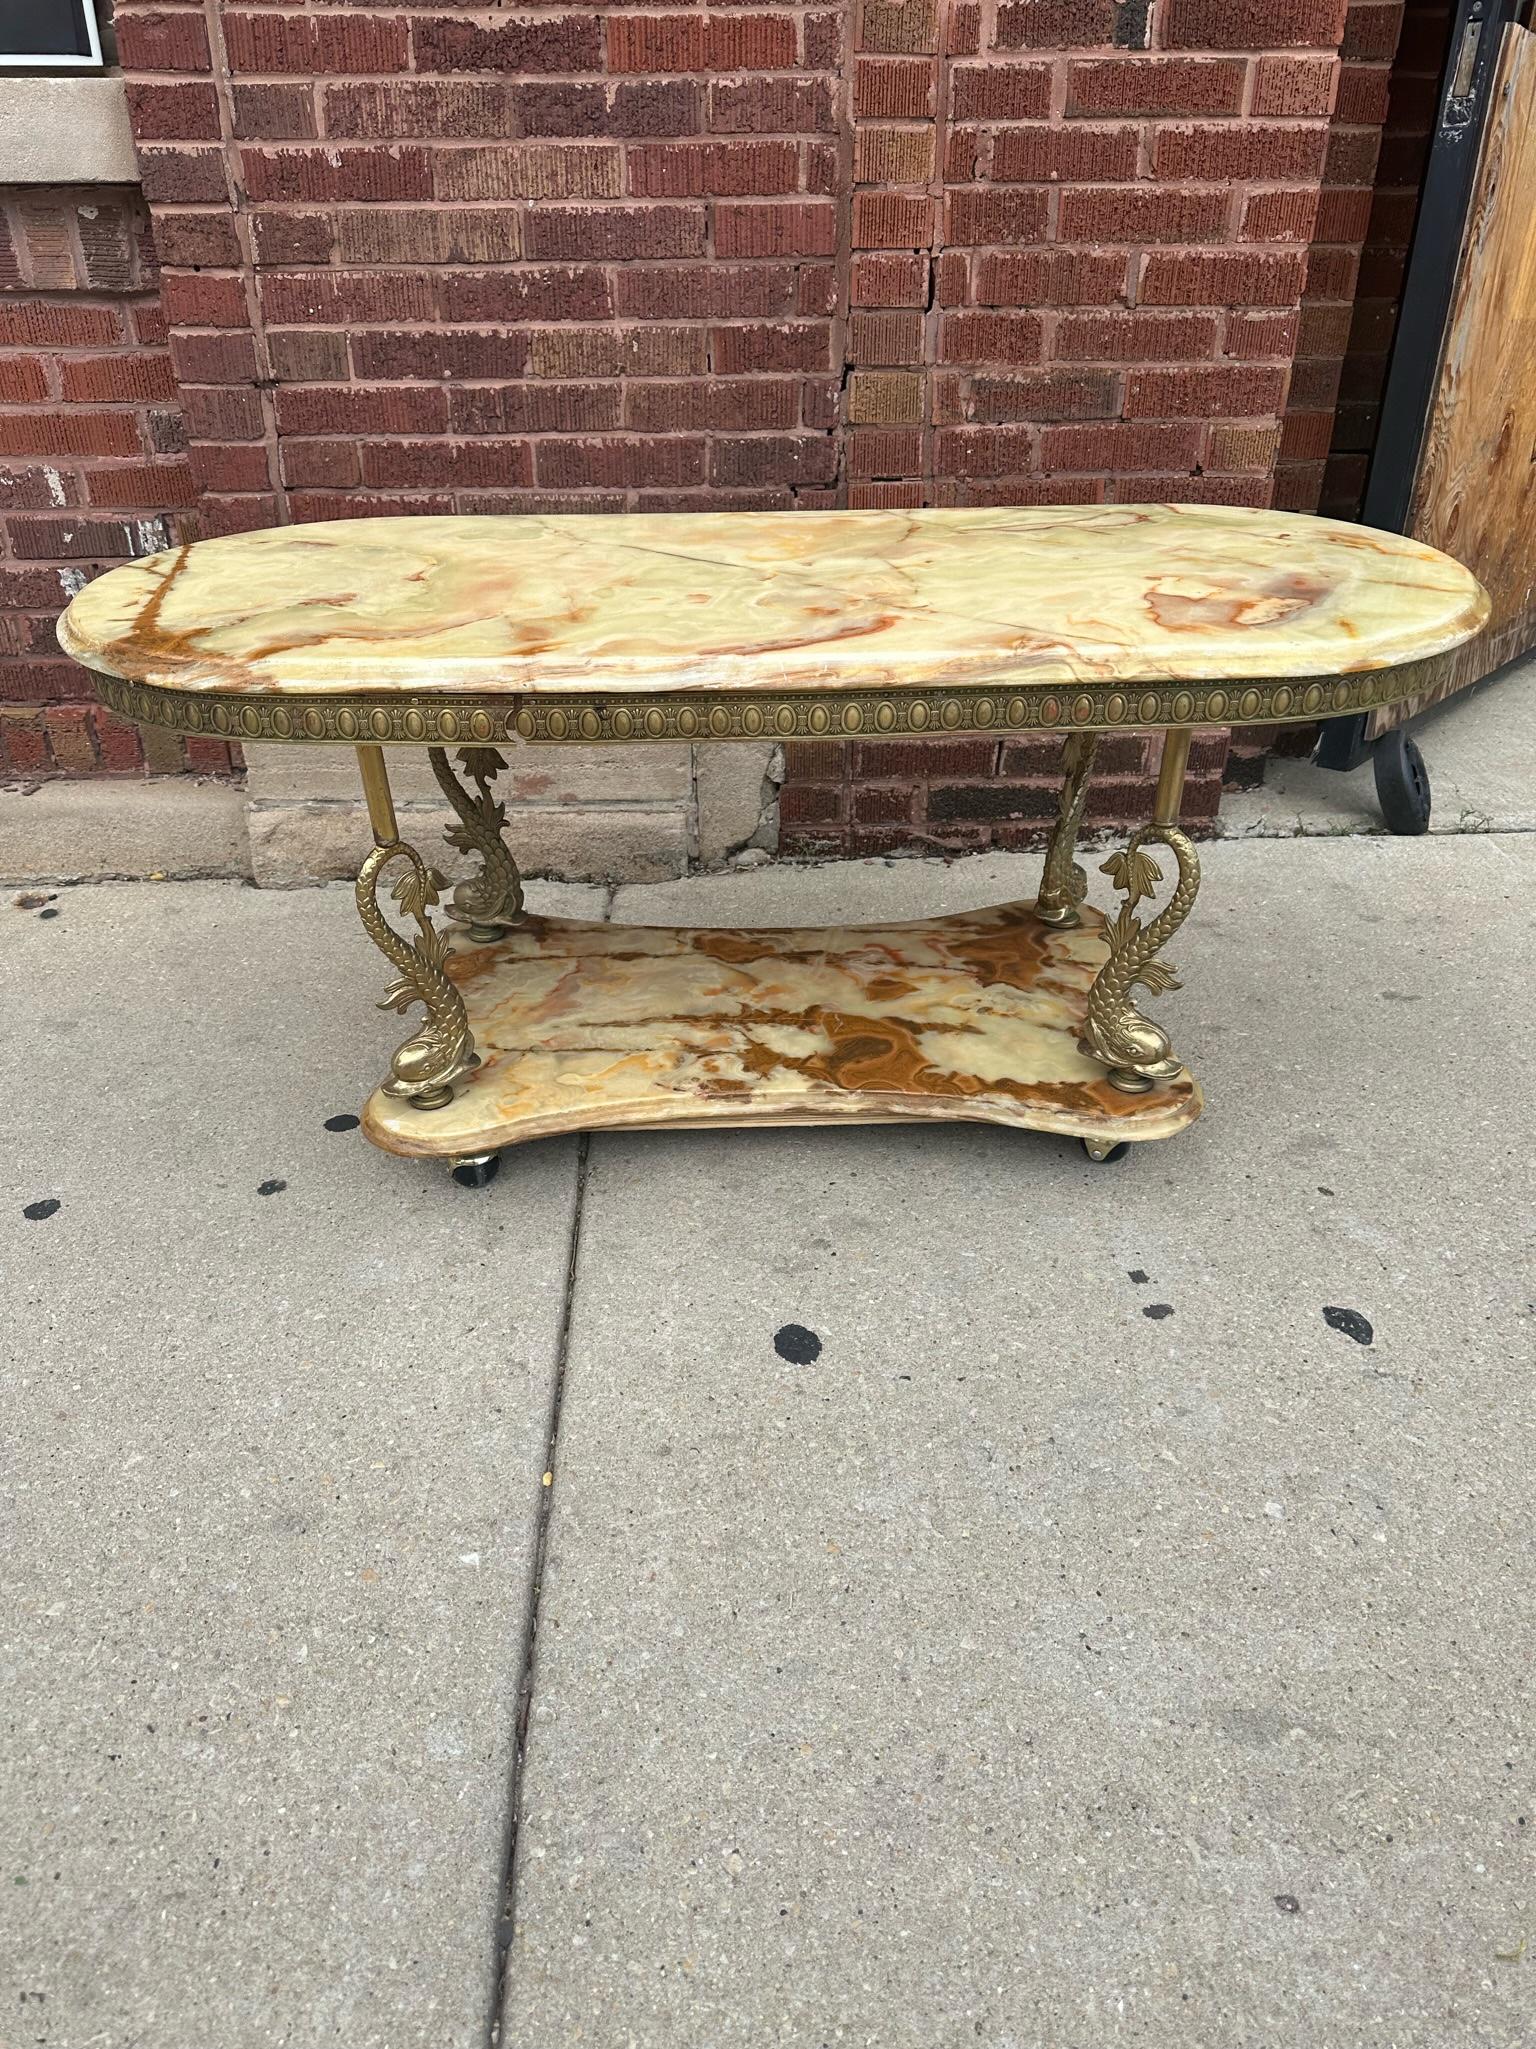 Antique Italian 2 Tier Ornate Onyx and Figural Koi Fish Sculpted Brass Framed Coffee Table

Beautiful Beveled Edge Oval Amber Veined Green Onyx with Intricate Detailed Sculpted Ornate Brass Frame with 4 Japanese Fighting Koi Fish flanking each